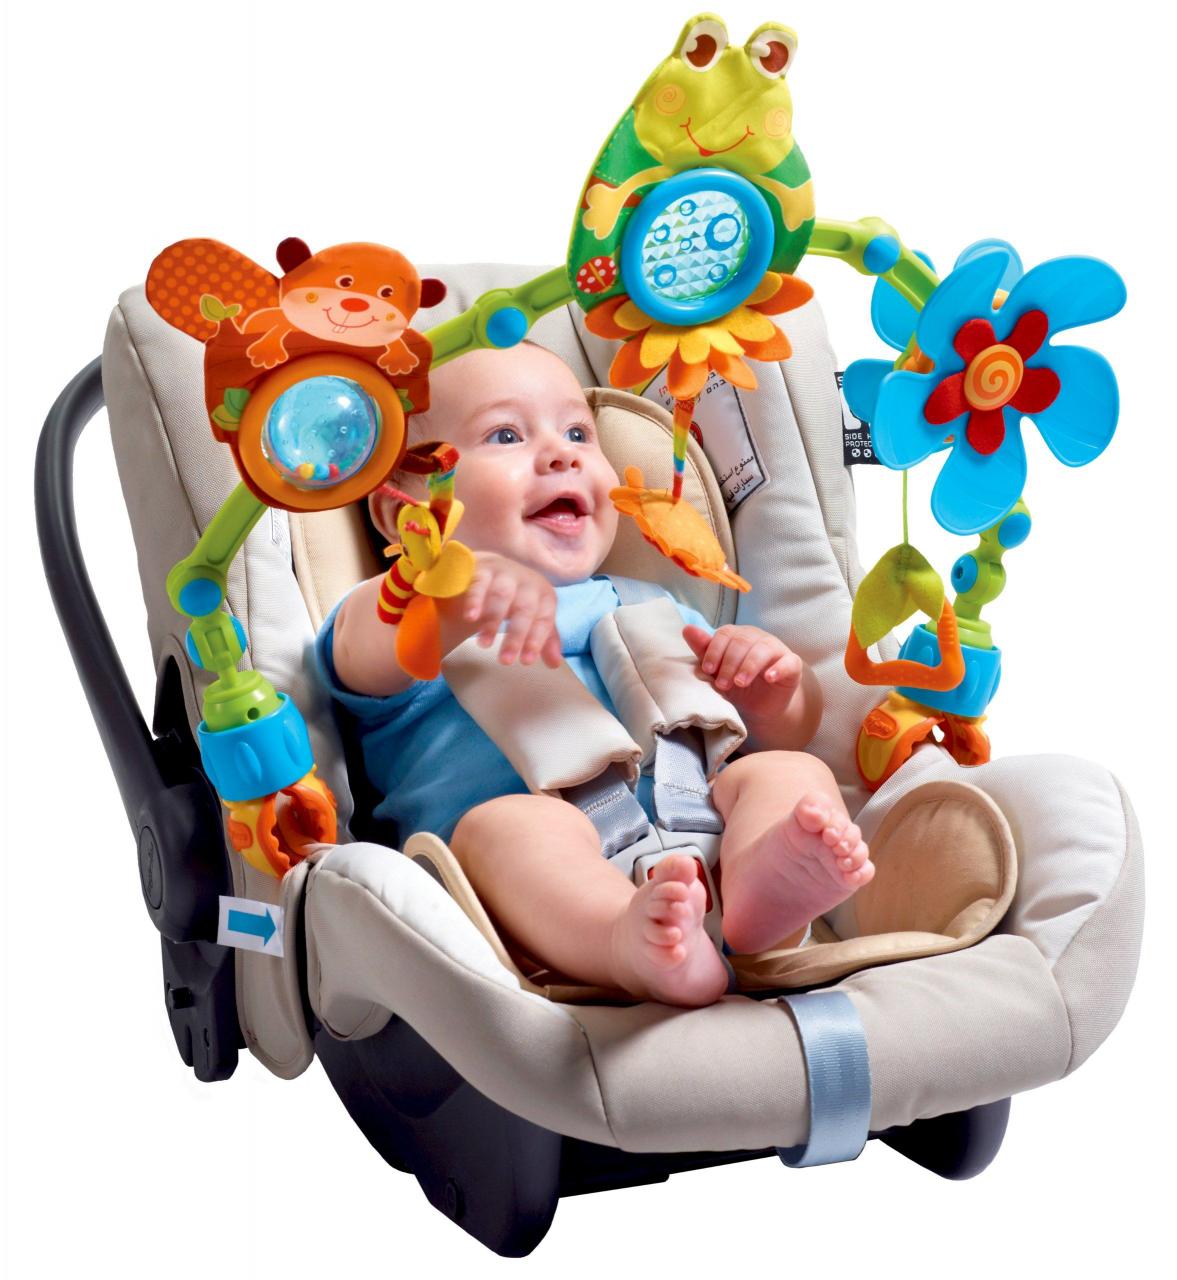 Amazon.com : Tiny Love Take-Along Arch, My Nature Pals Stroll : Baby  Stroller Toys : Baby | Baby car seats, Car seat toys, Baby stroller toys